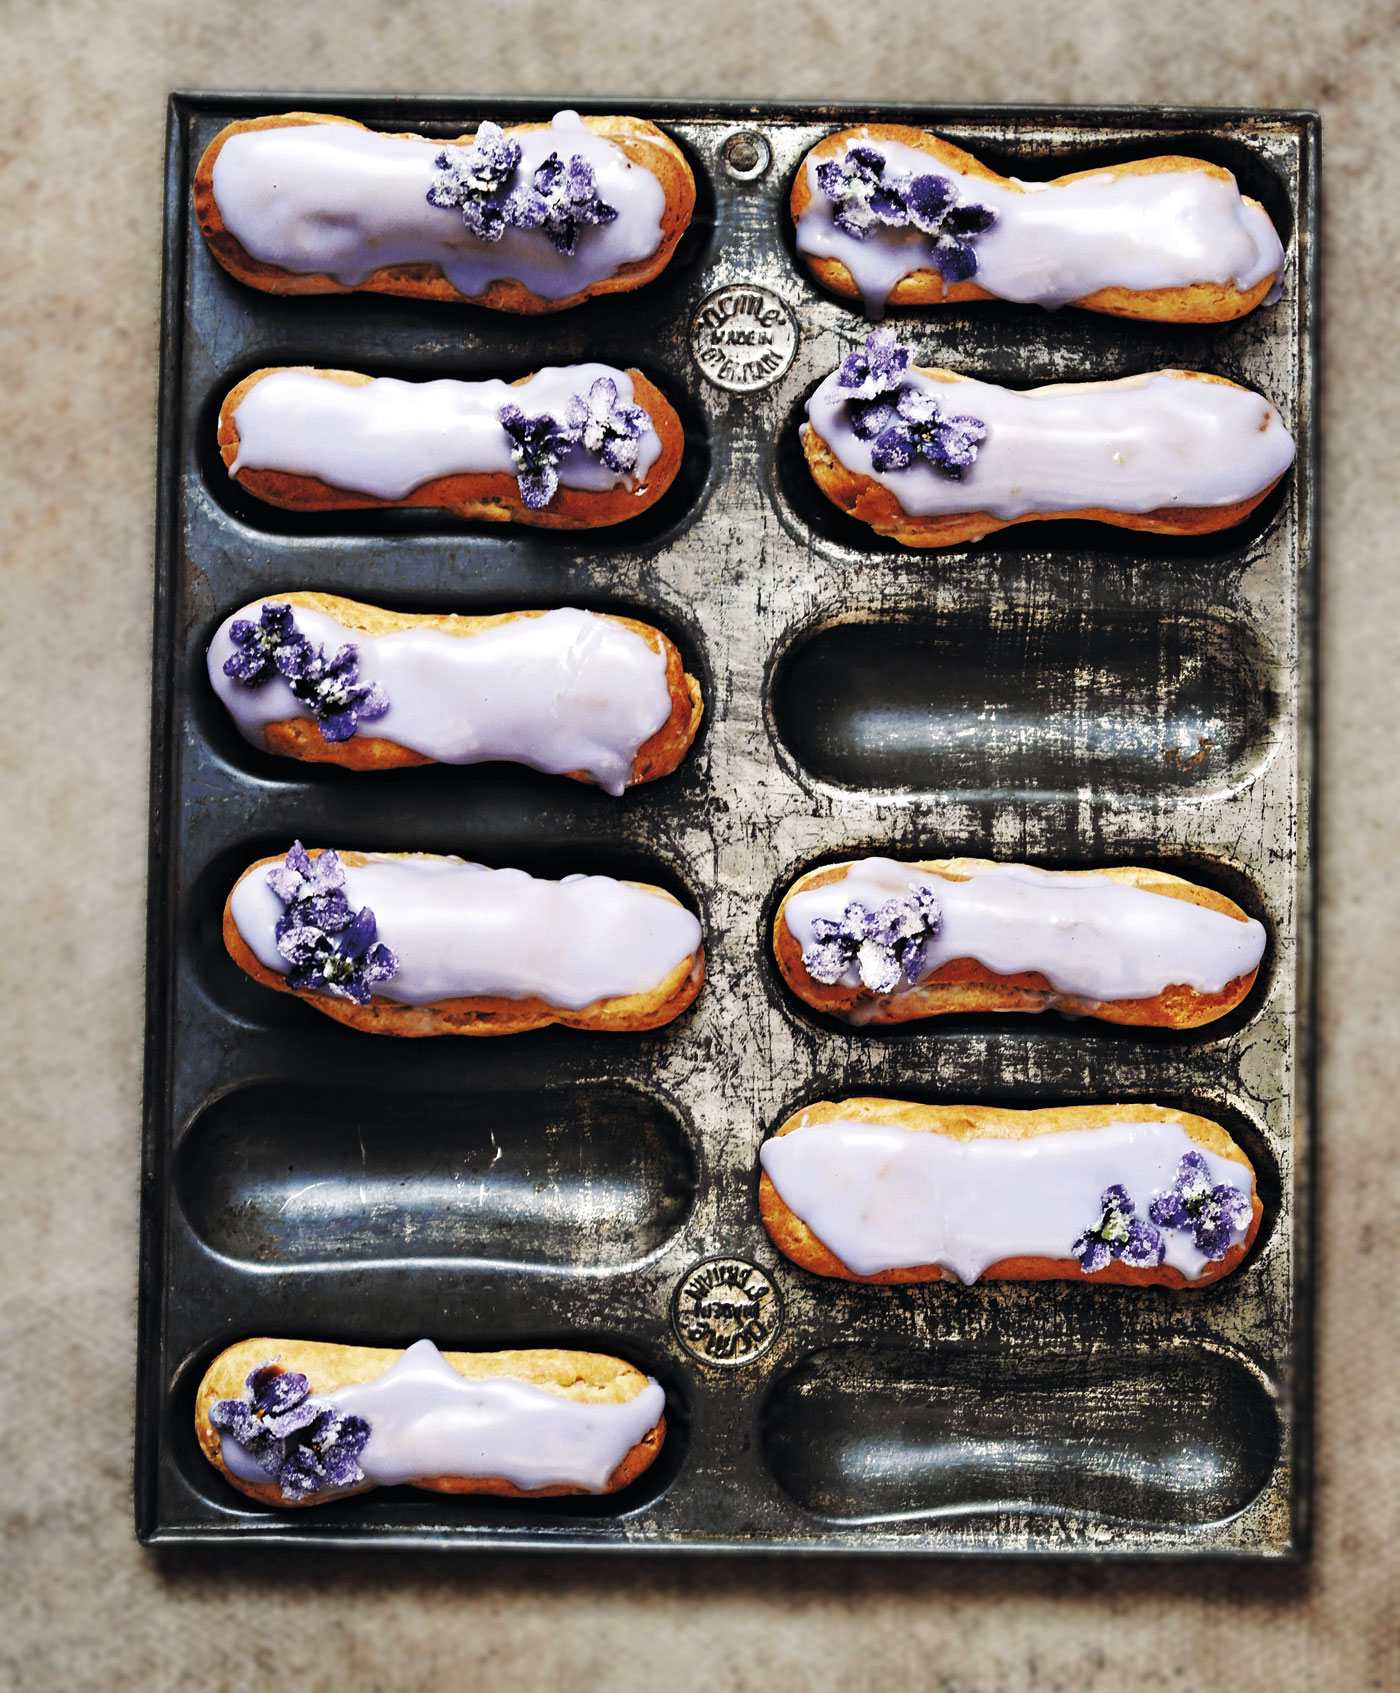 City Style and Living Magazine made with love recipe book violet eclairs finished